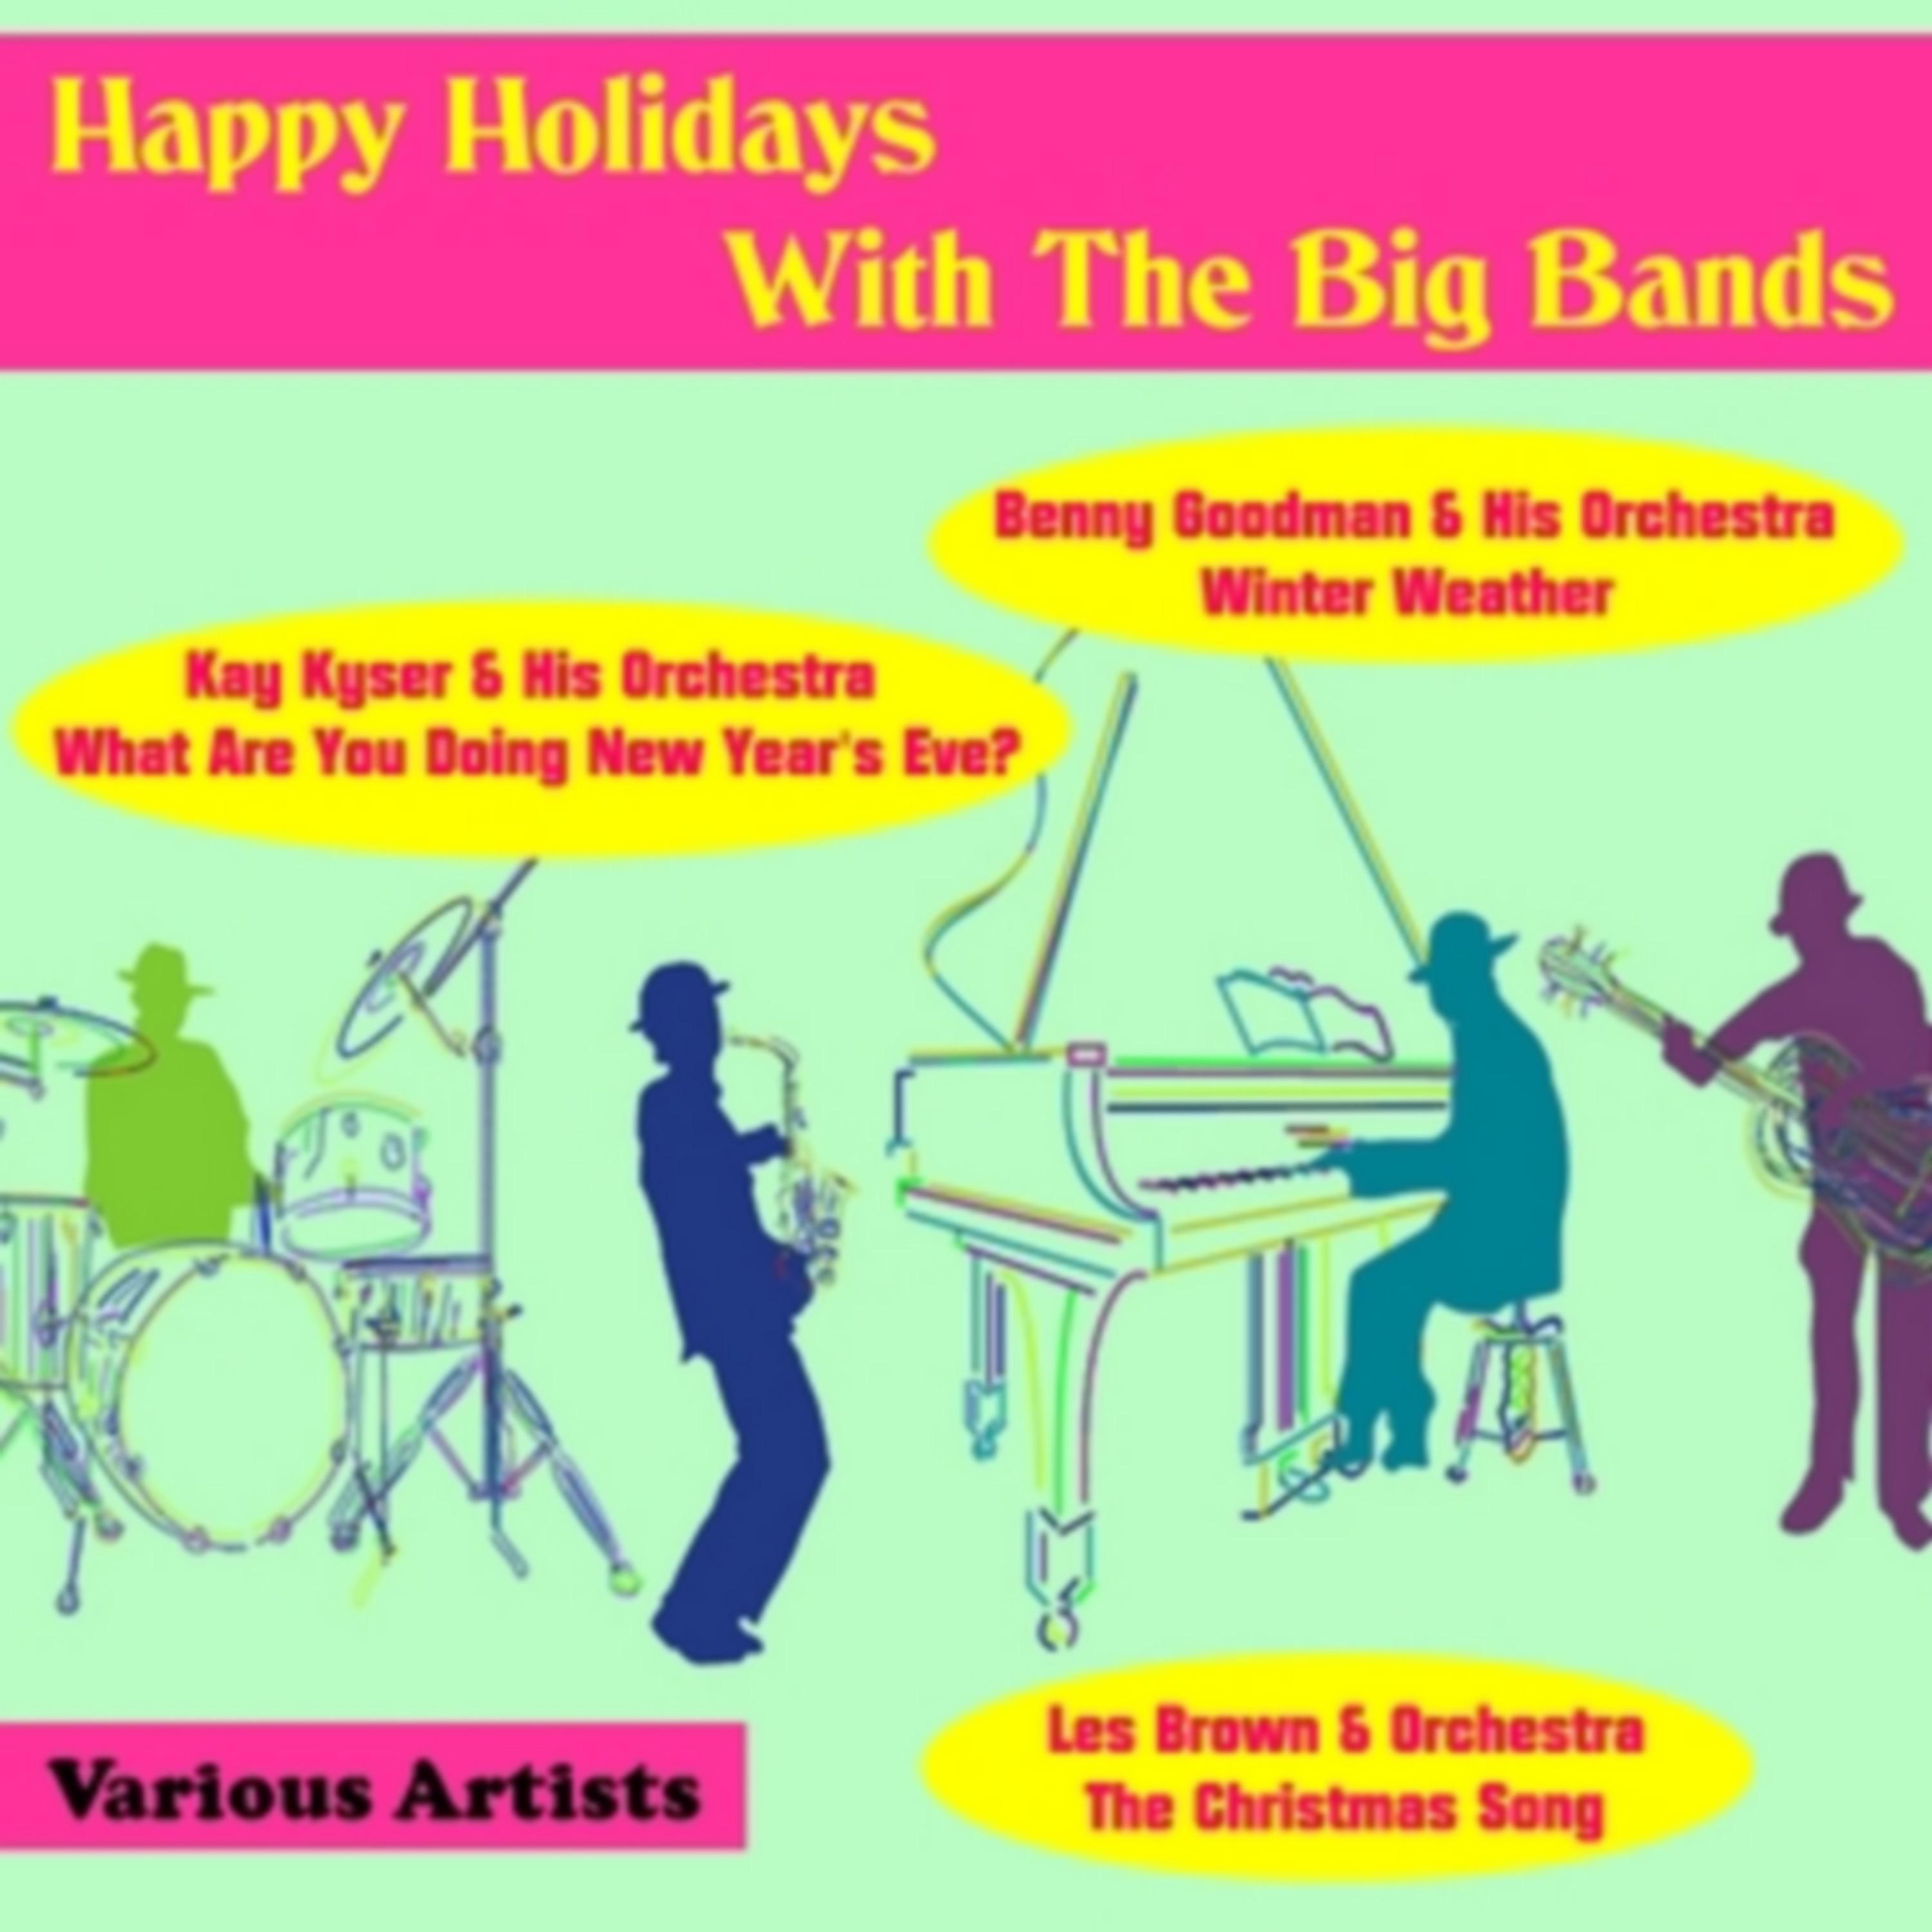 Happy Holidays with the Big Bands